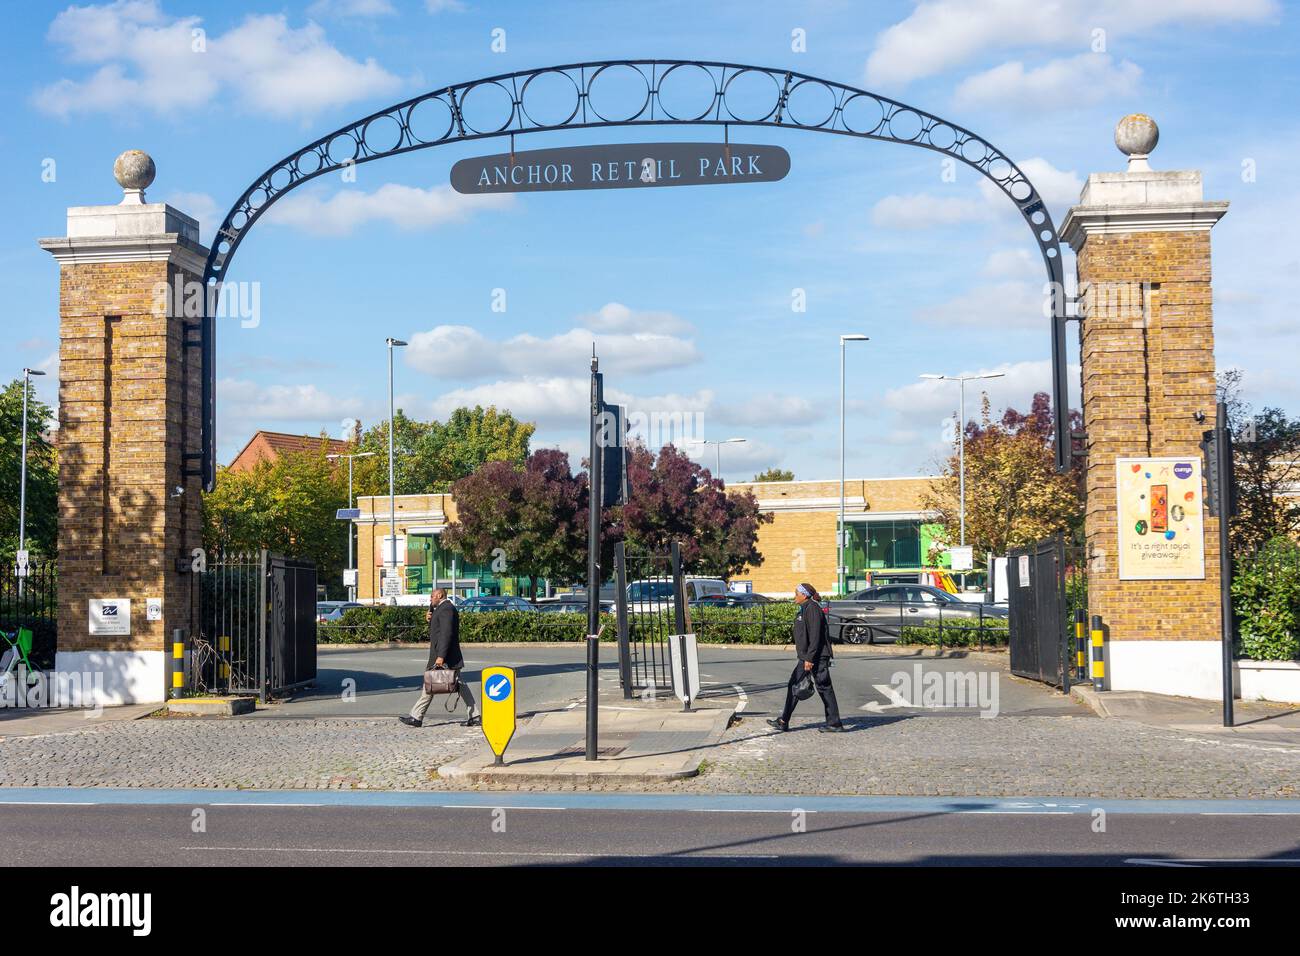 Entrance to Anchor Retail Park, Mile End Road, Bethnal Green, London Borough of Tower Hamlets, Greater London, England, United Kingdom Stock Photo